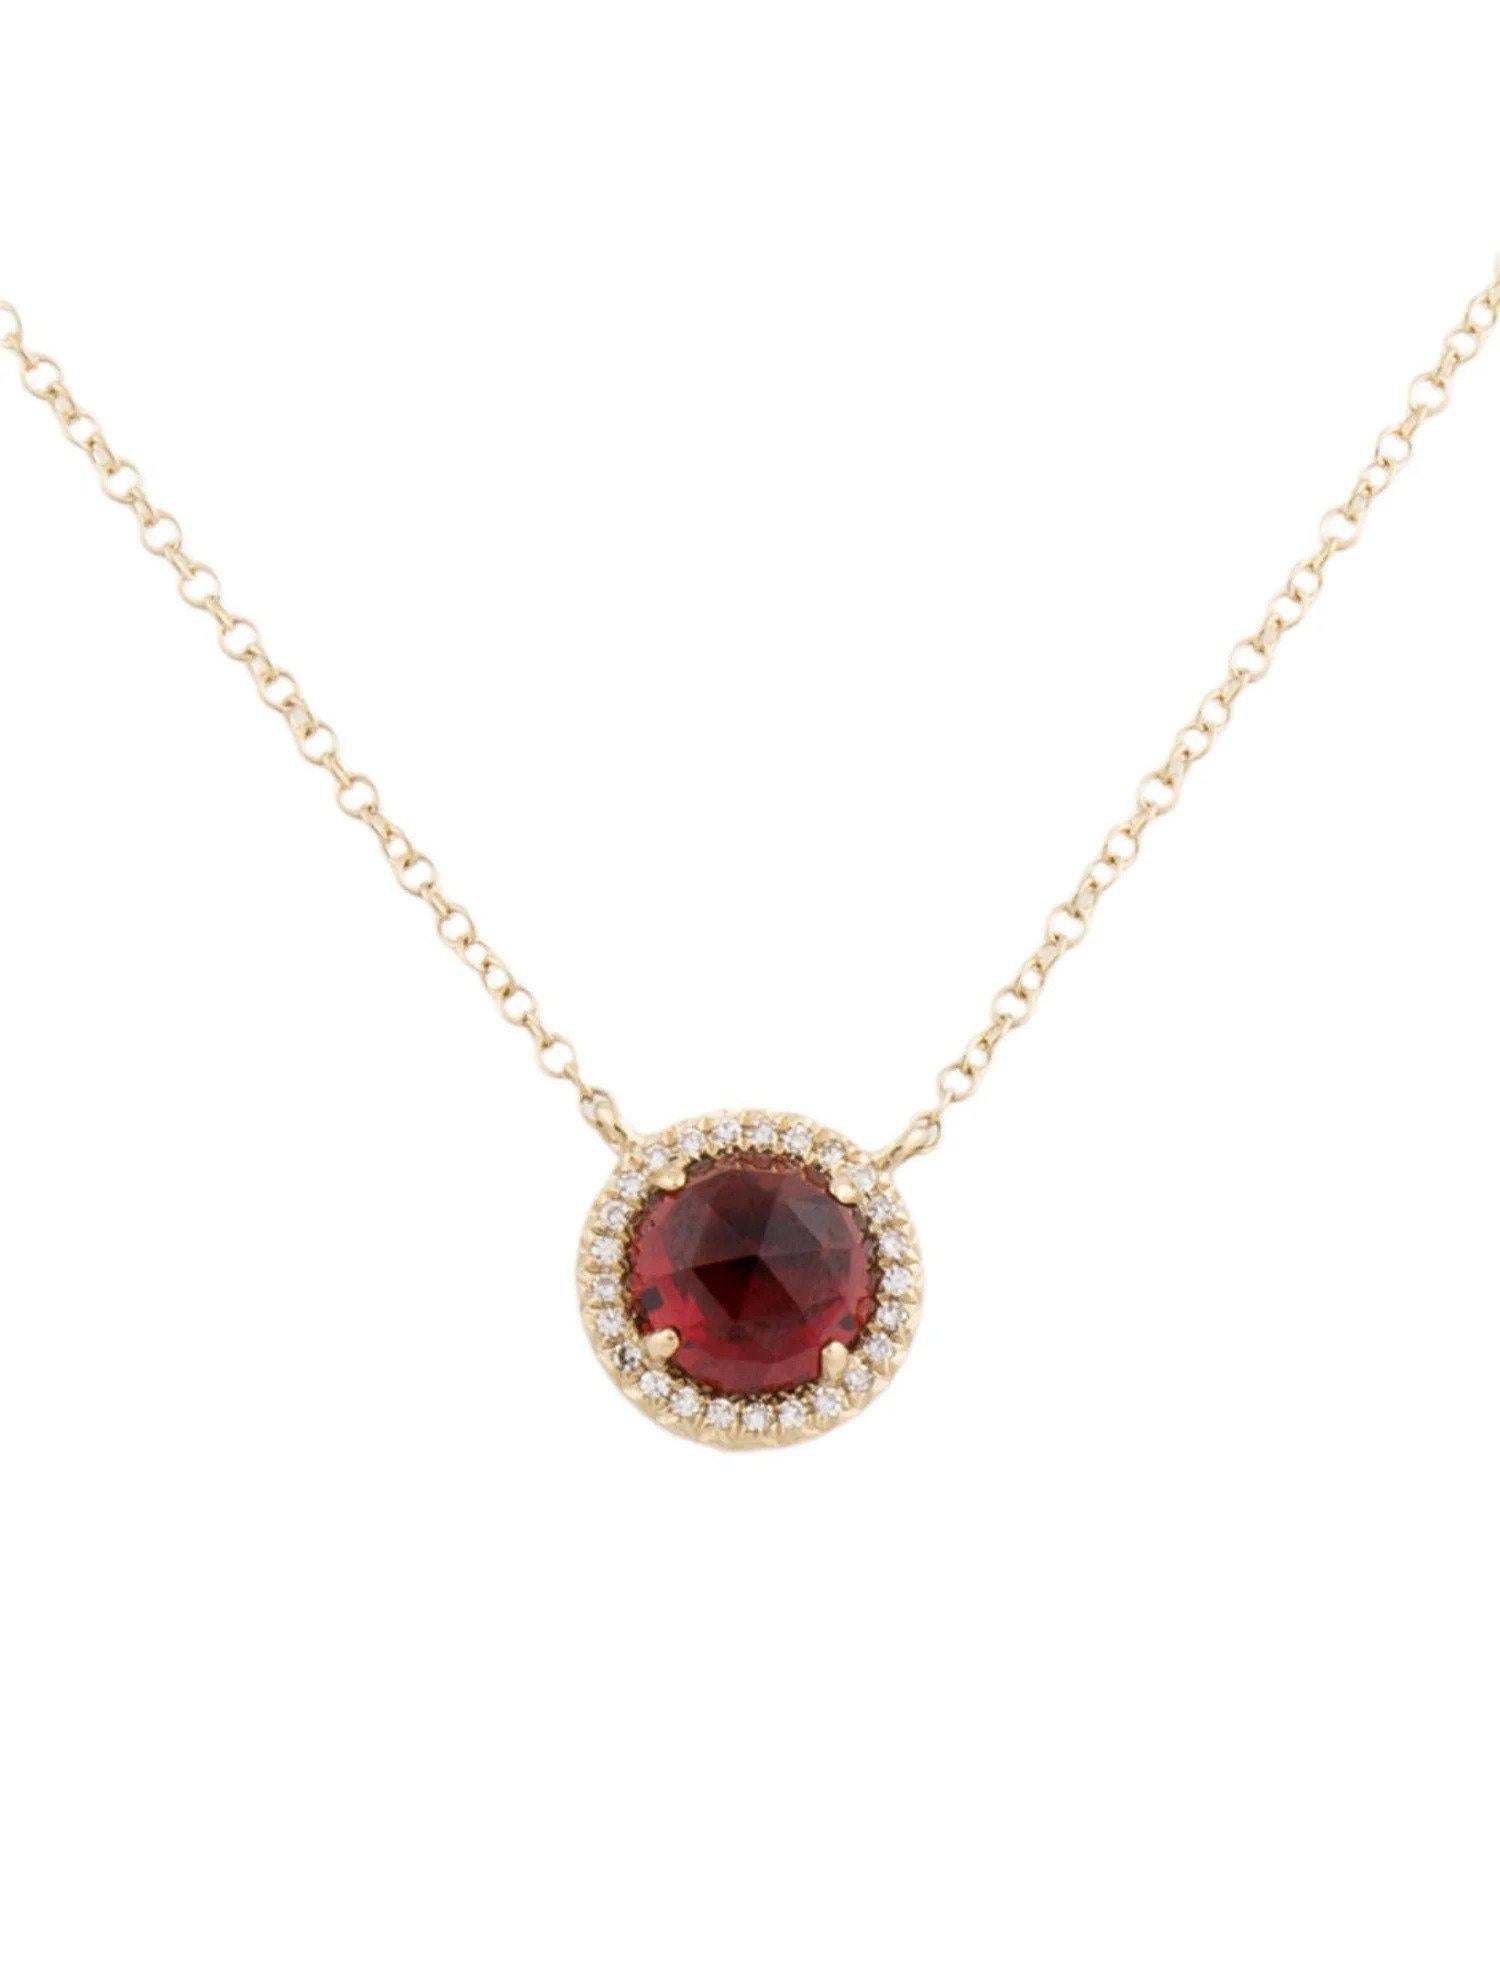 1.48 Carat Round Garnet & Diamond Yellow Gold Pendant Necklace  In New Condition For Sale In Great Neck, NY